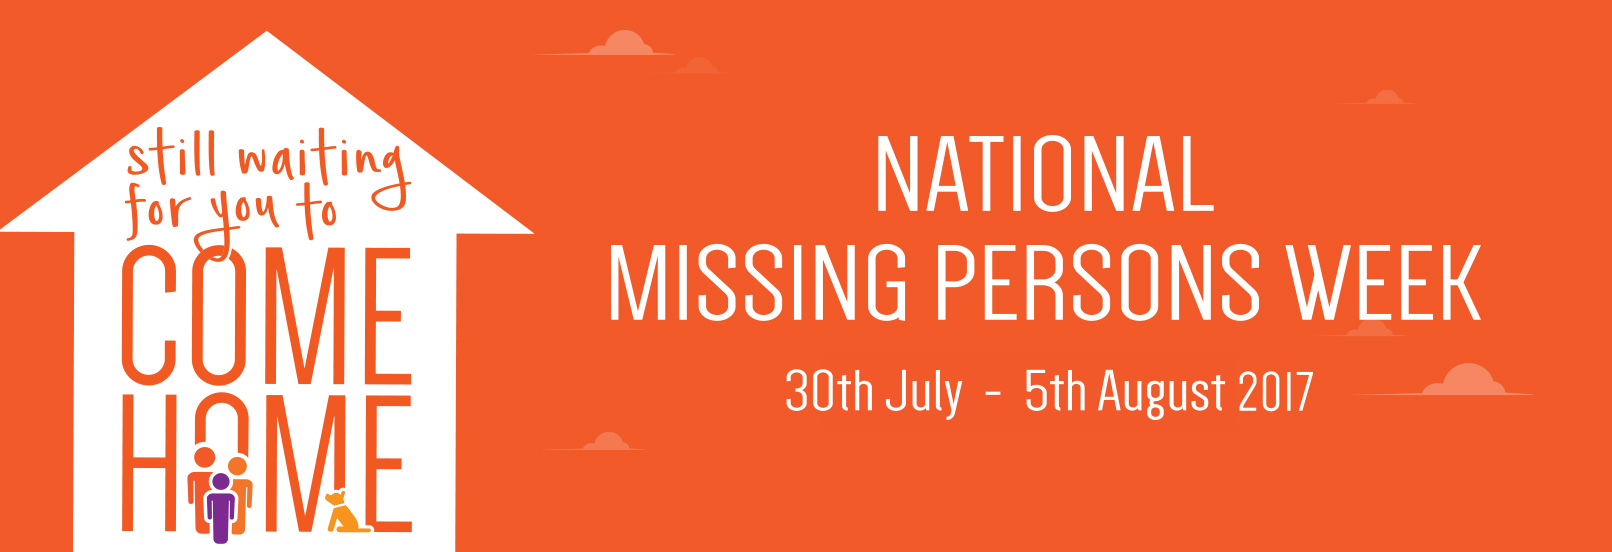 National Missing Persons Week 2017 graphic - Still waiting for you to come home